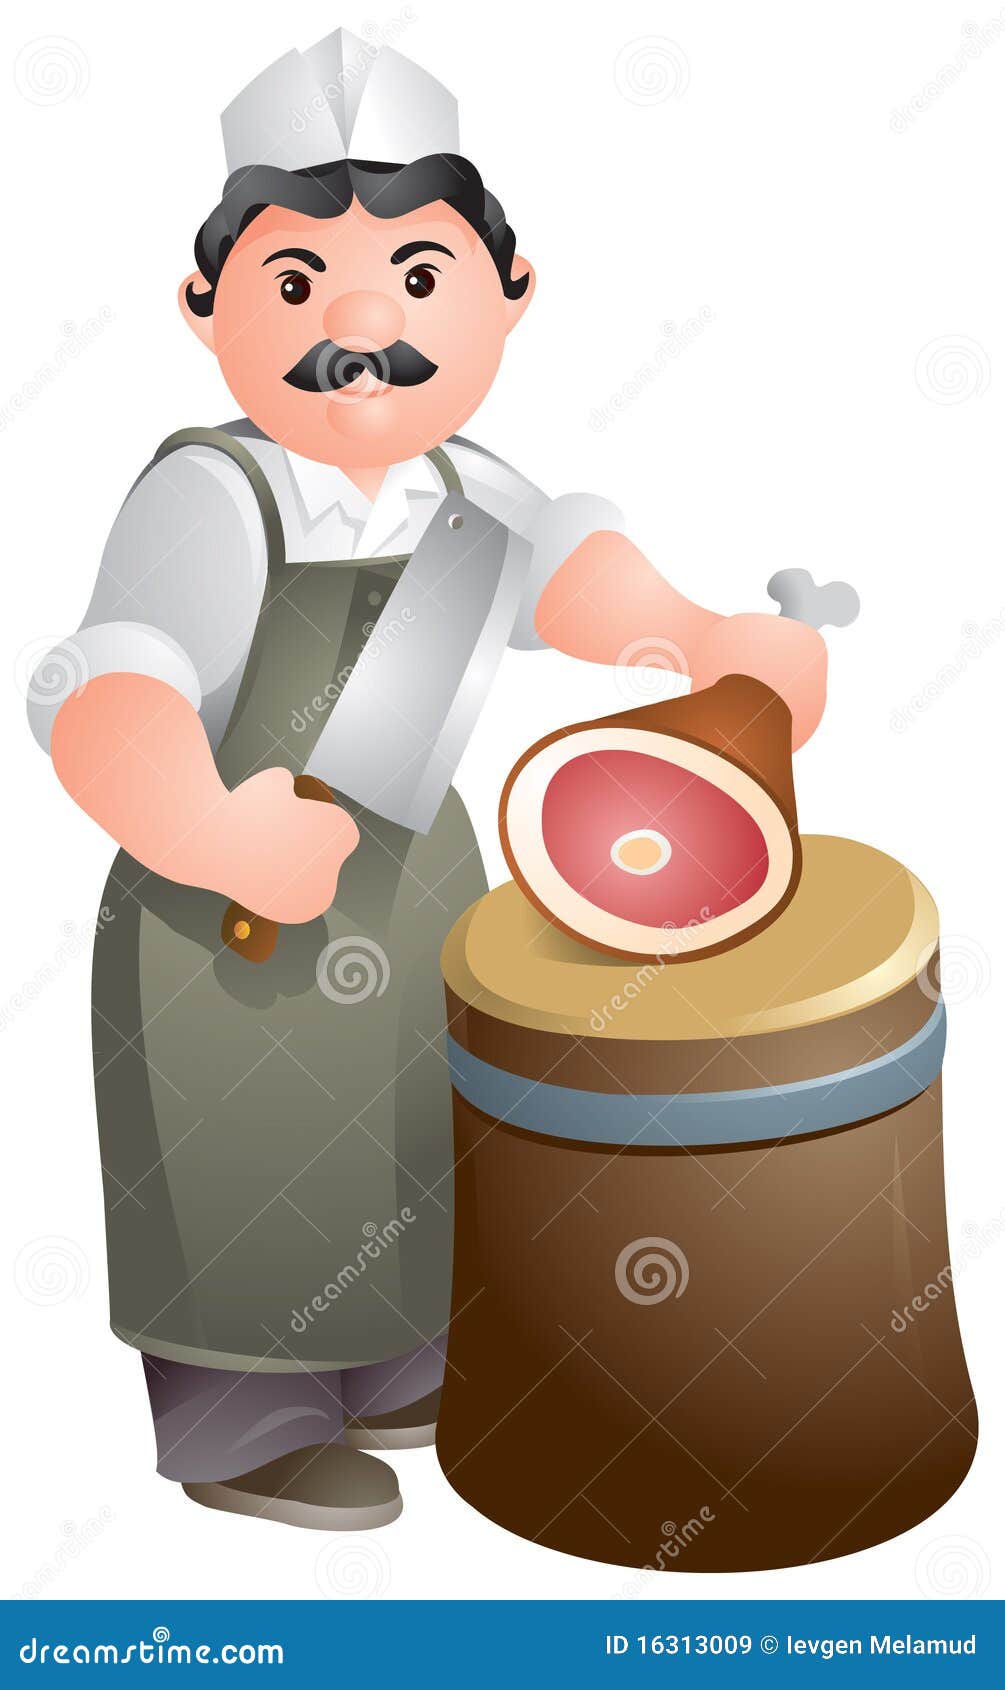 Butcher Or Chef Cutting Meat Stock Vector - Image: 16313009